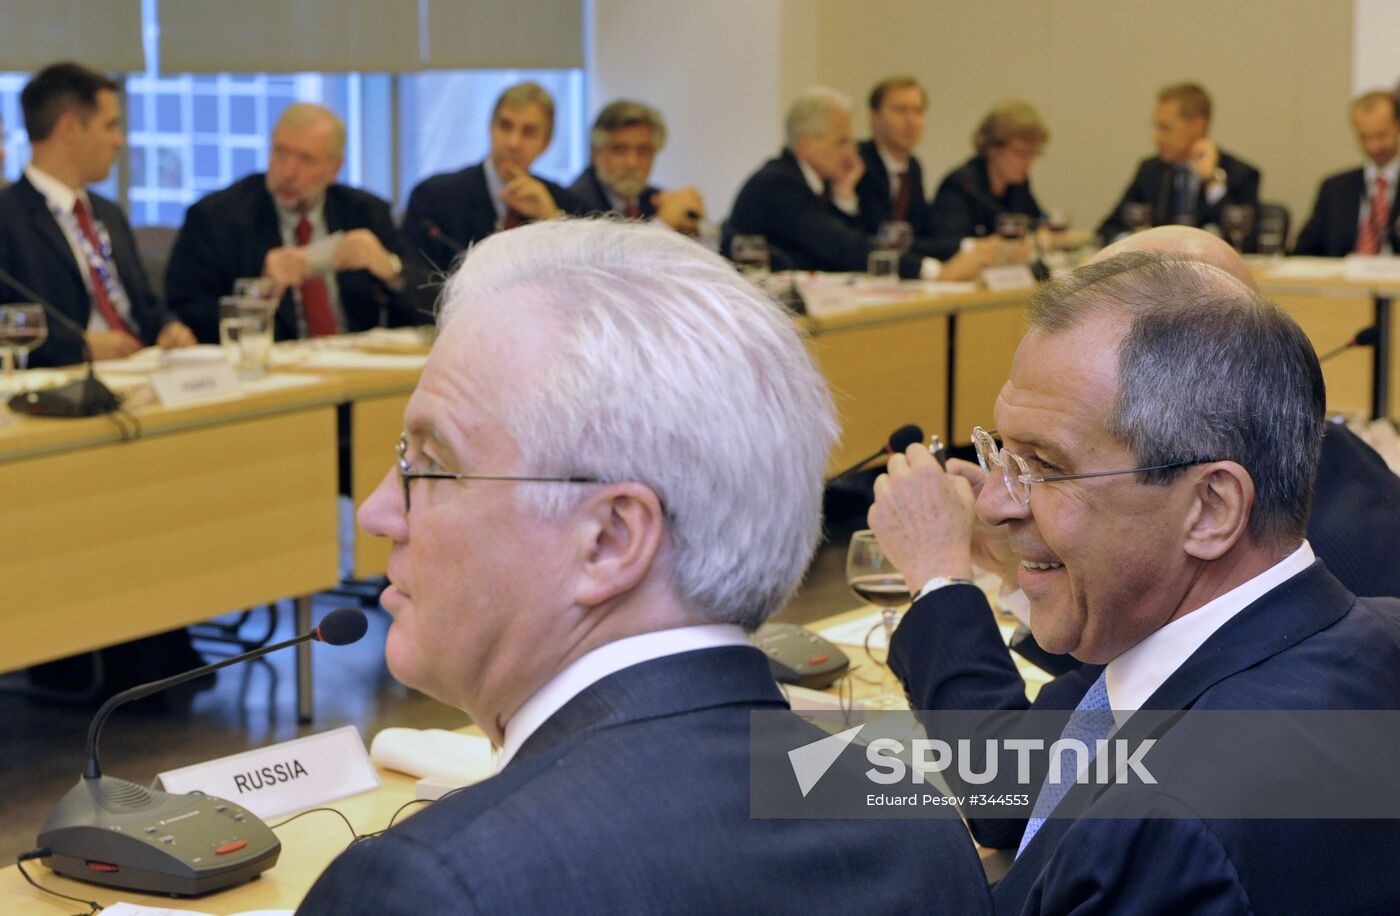 Russian diplomats meet with EU foreign ministers